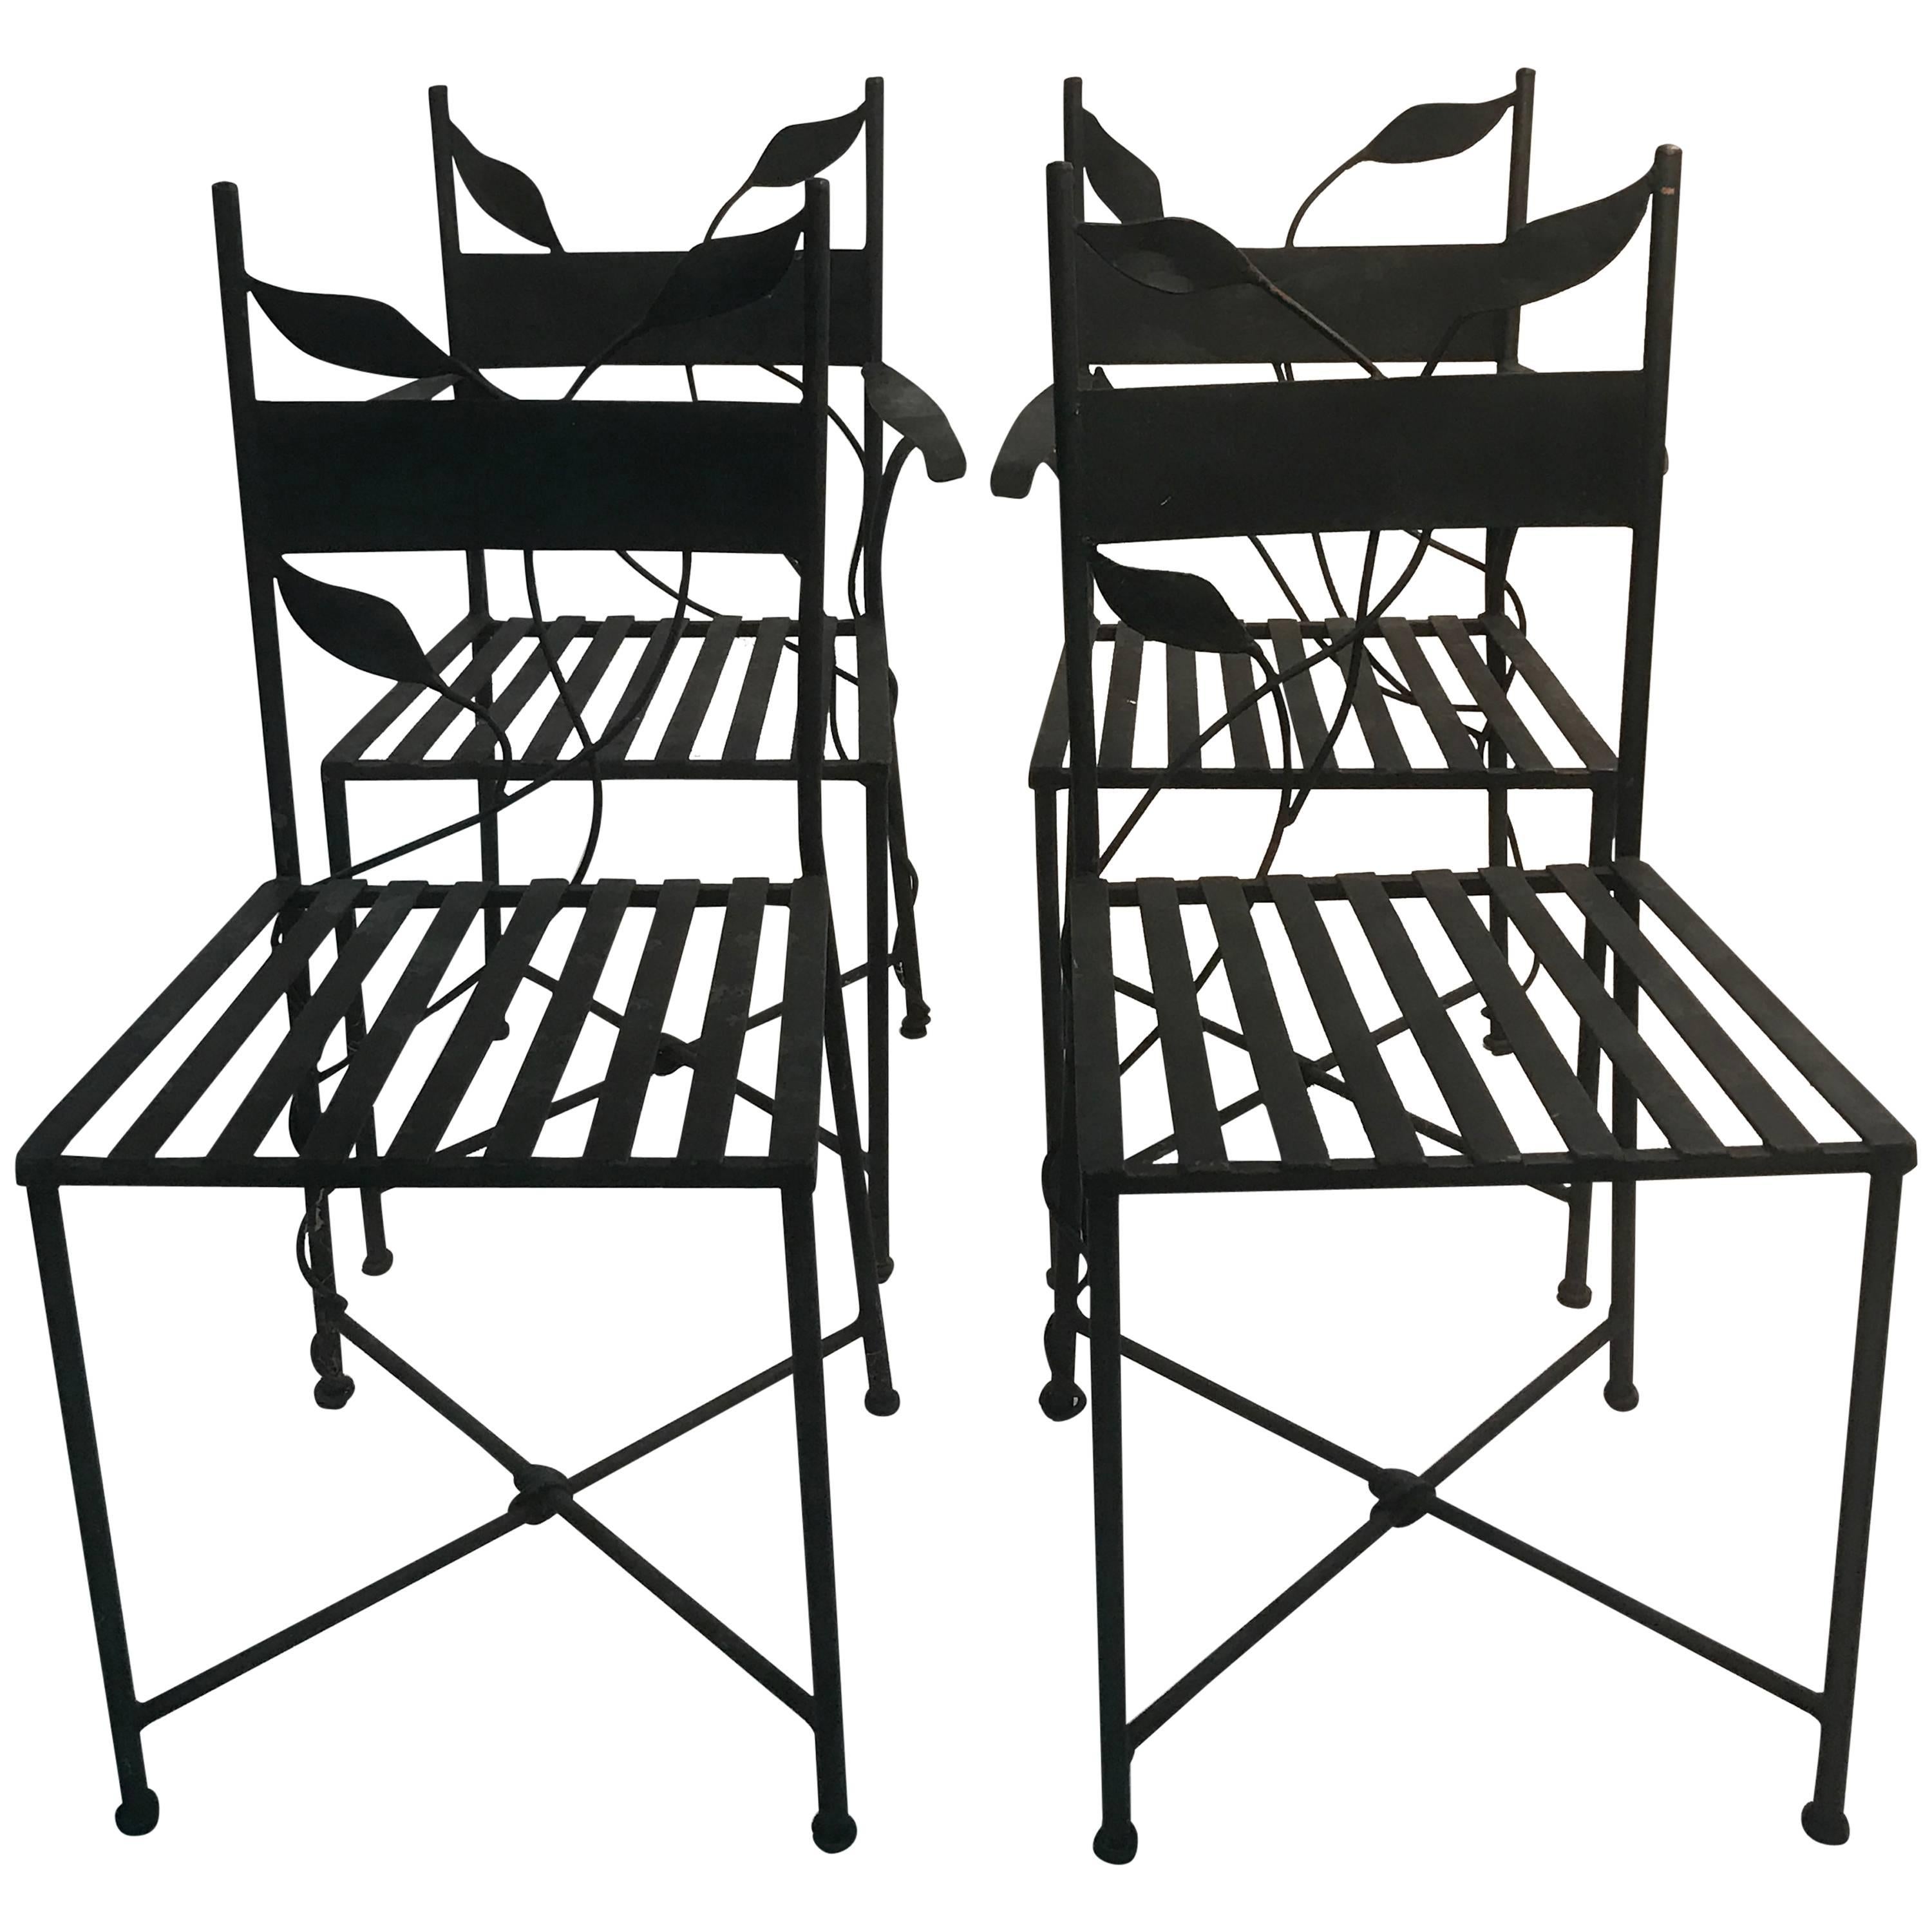 Outstanding Set of Outdoor Iron Garden Chairs in the Manner of Claude Lalanne For Sale